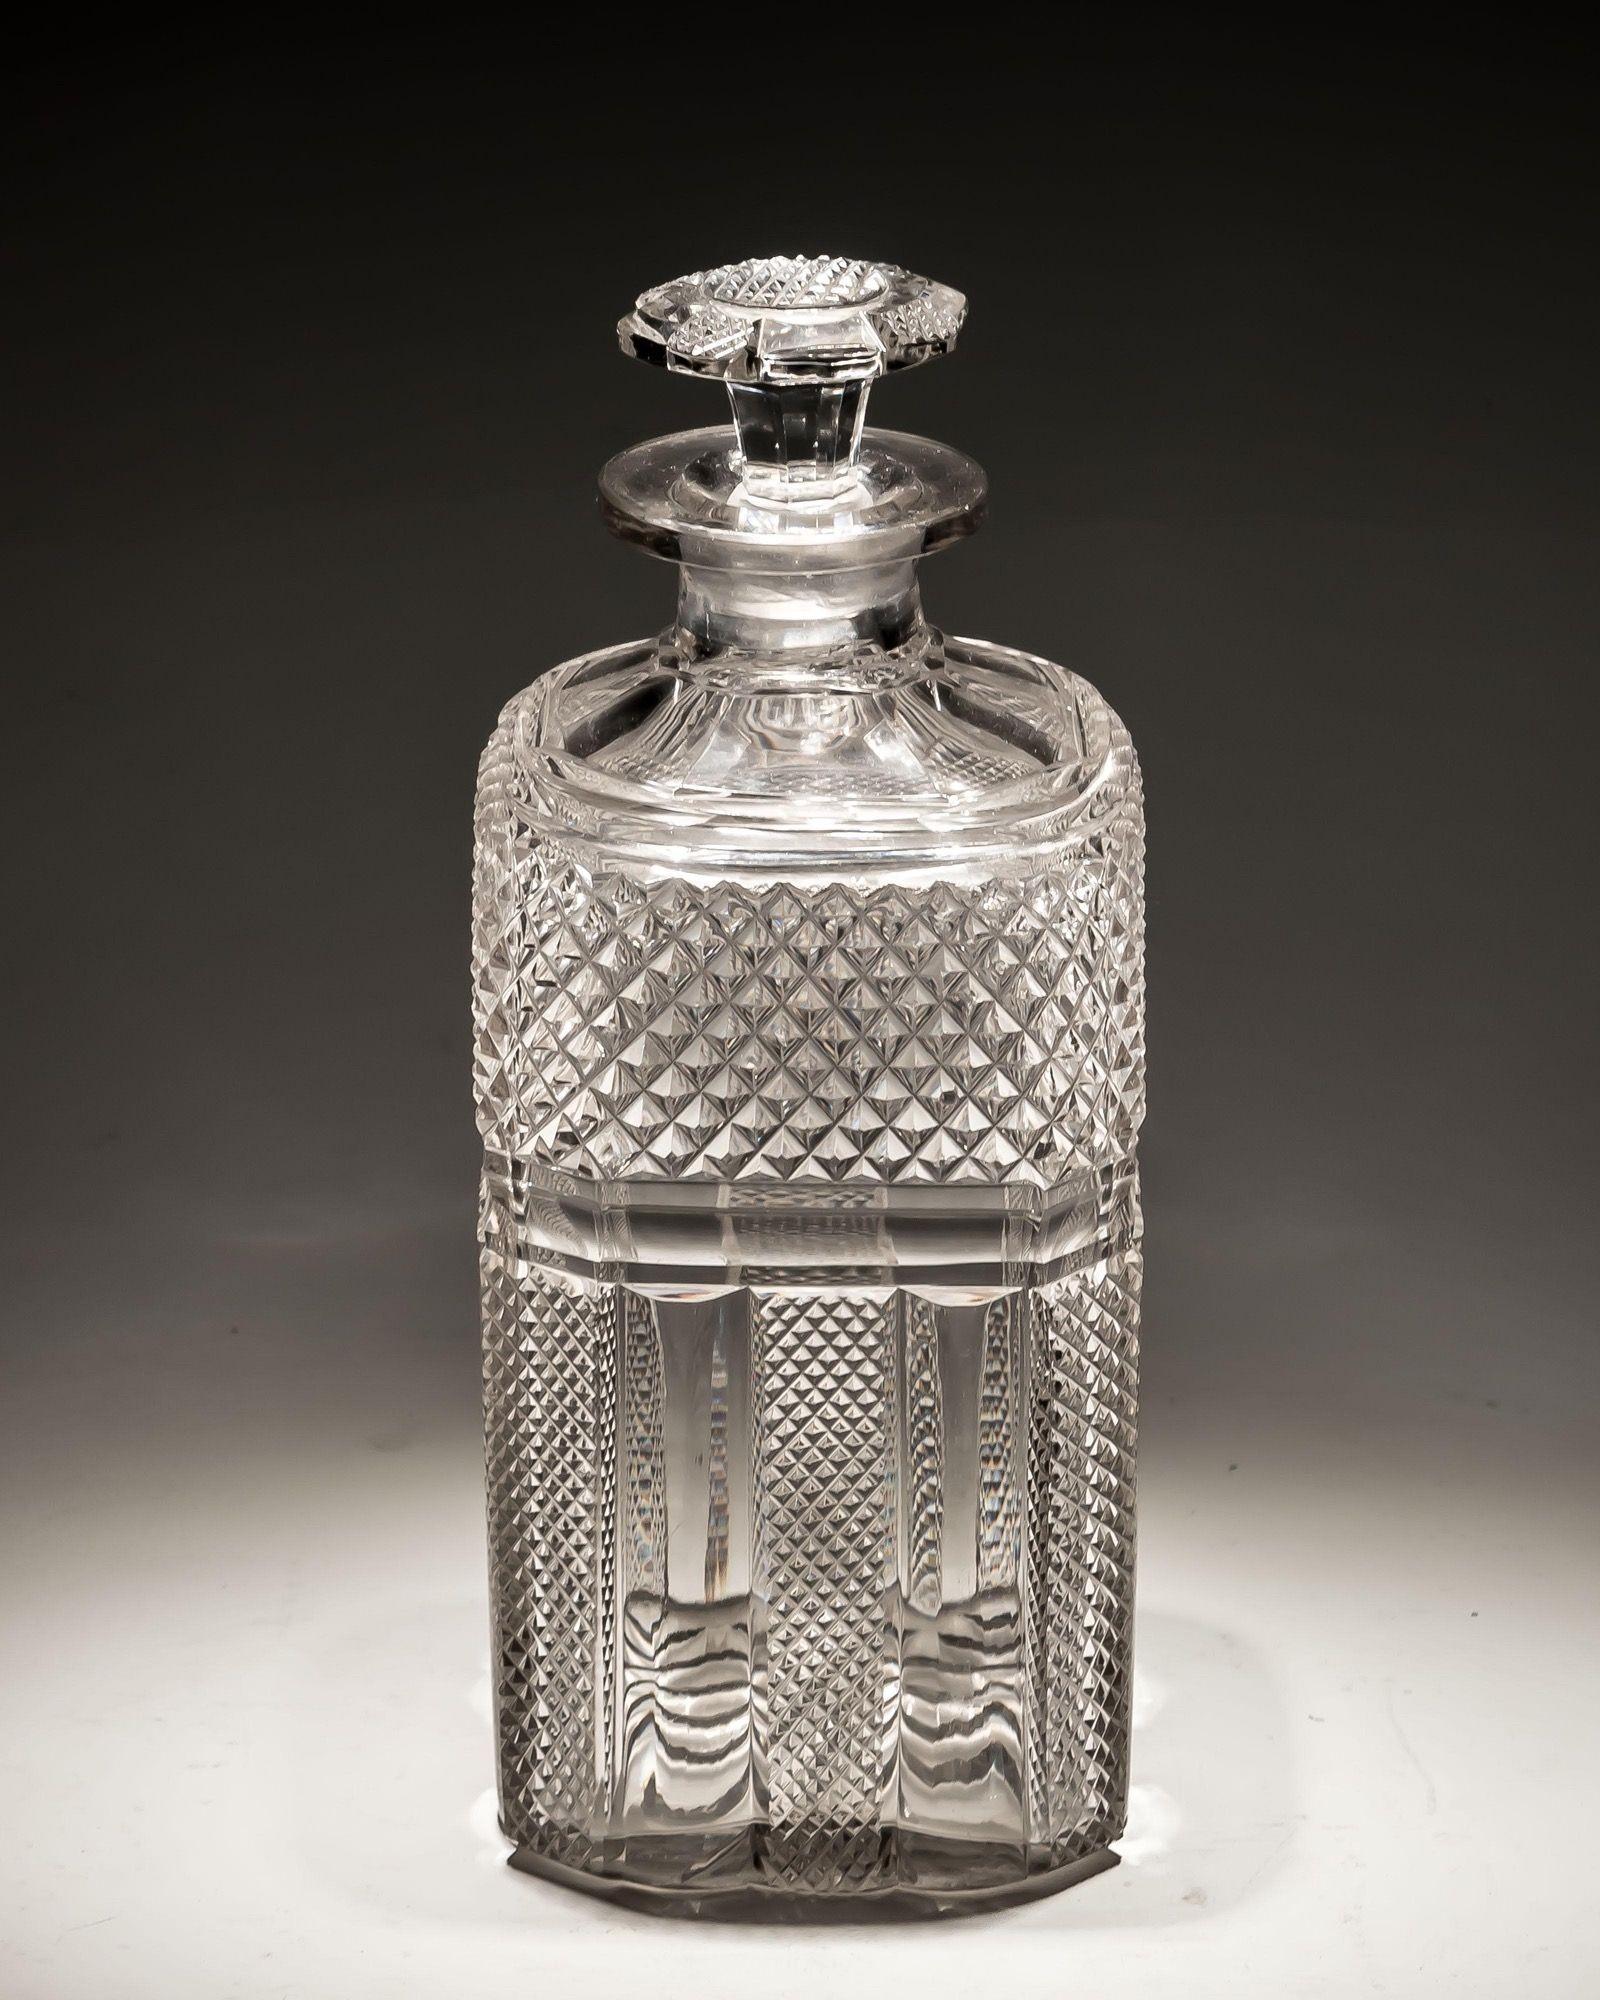 A very large, Regency whiskey decanter with diamond cut panels and corresponding cut stopper.